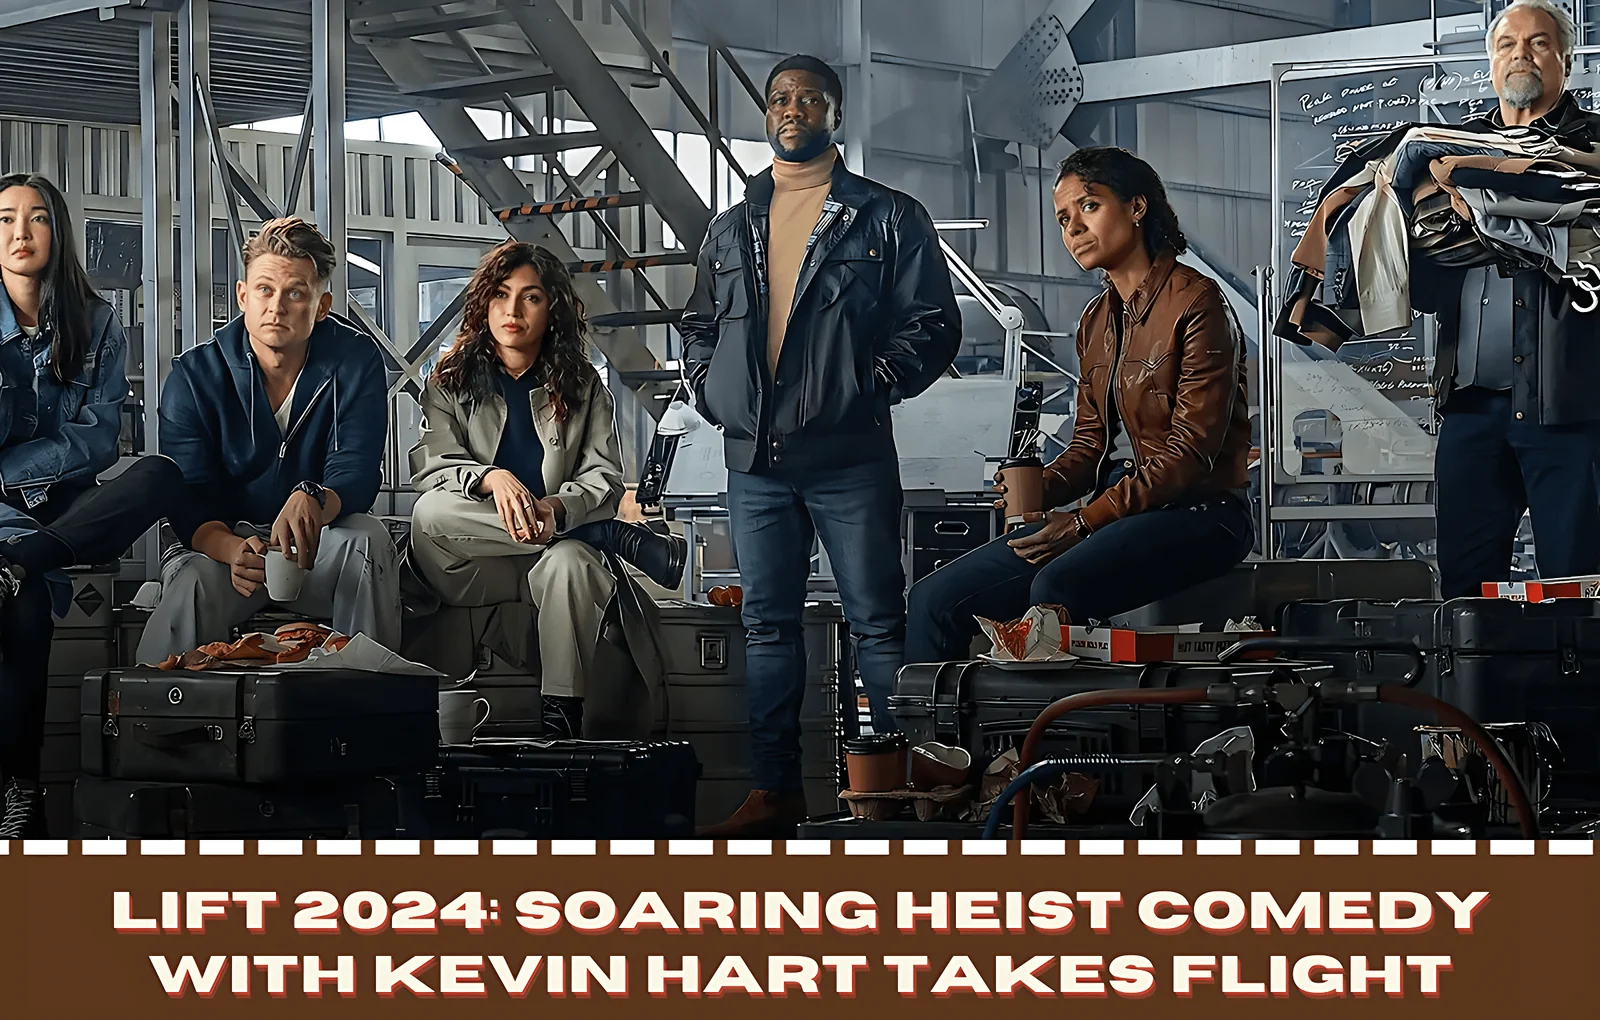 Lift 2024: Soaring Heist Comedy with Kevin Hart Takes Flight